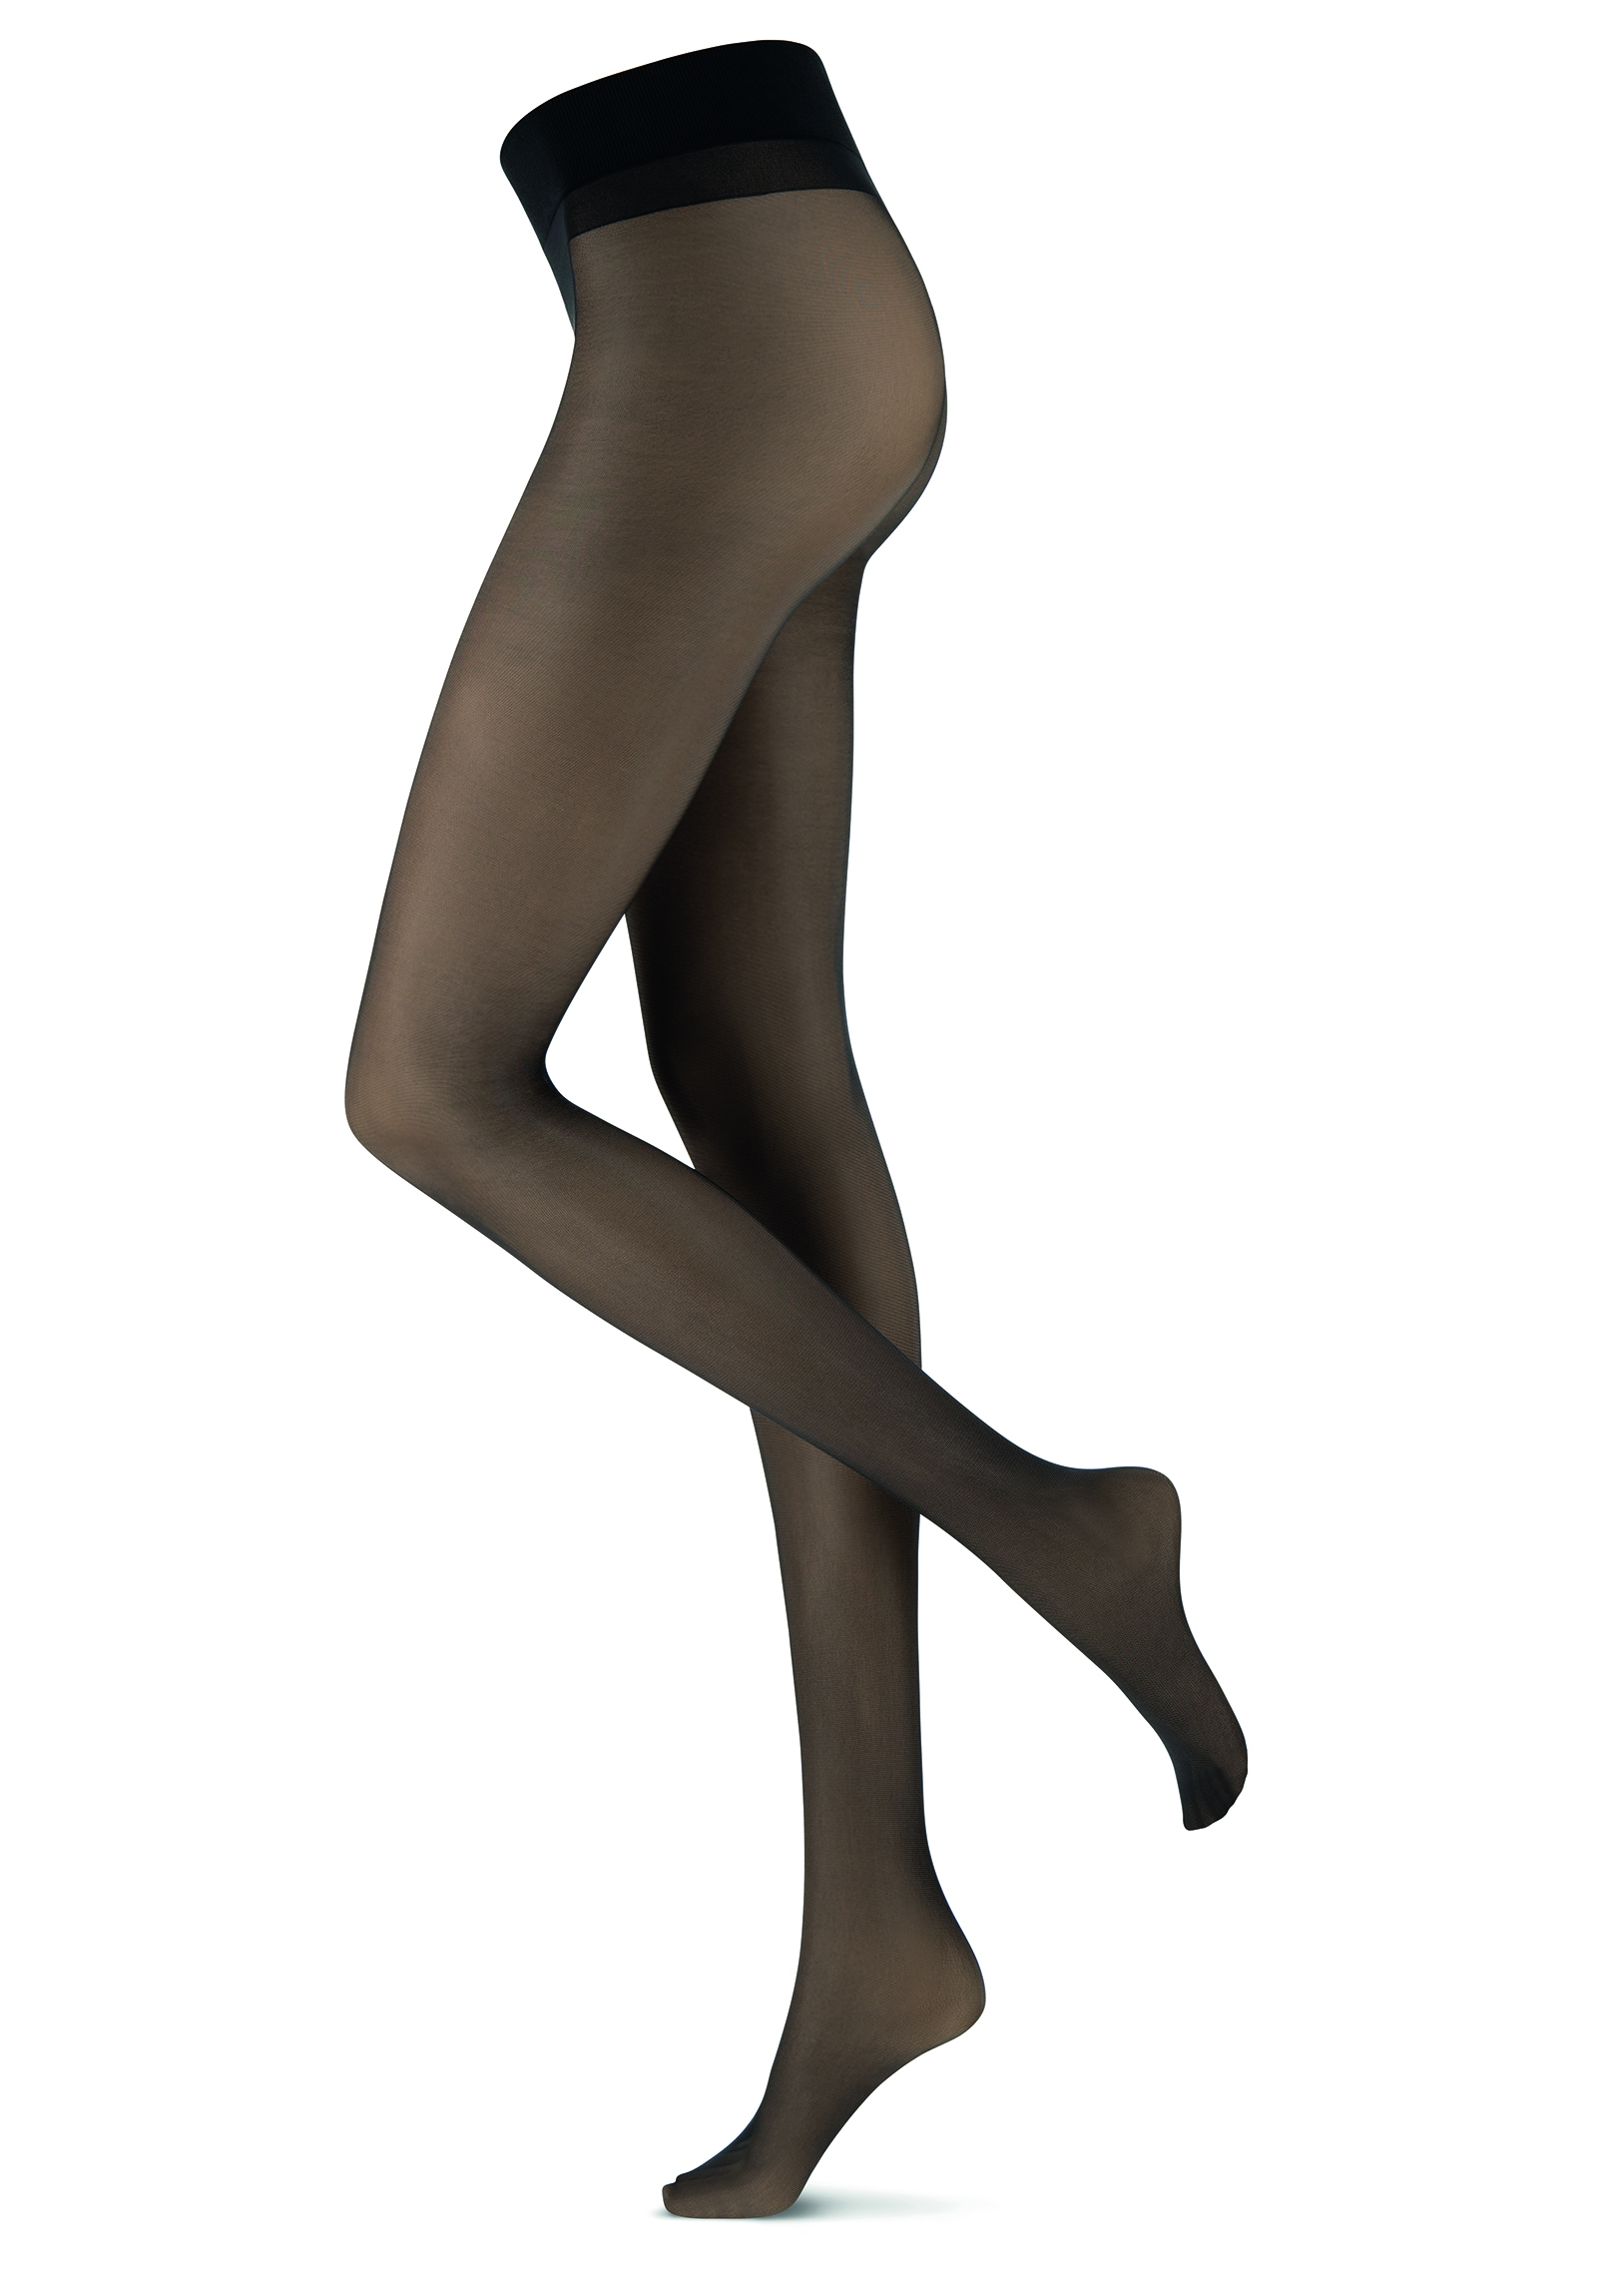  Magie Tights